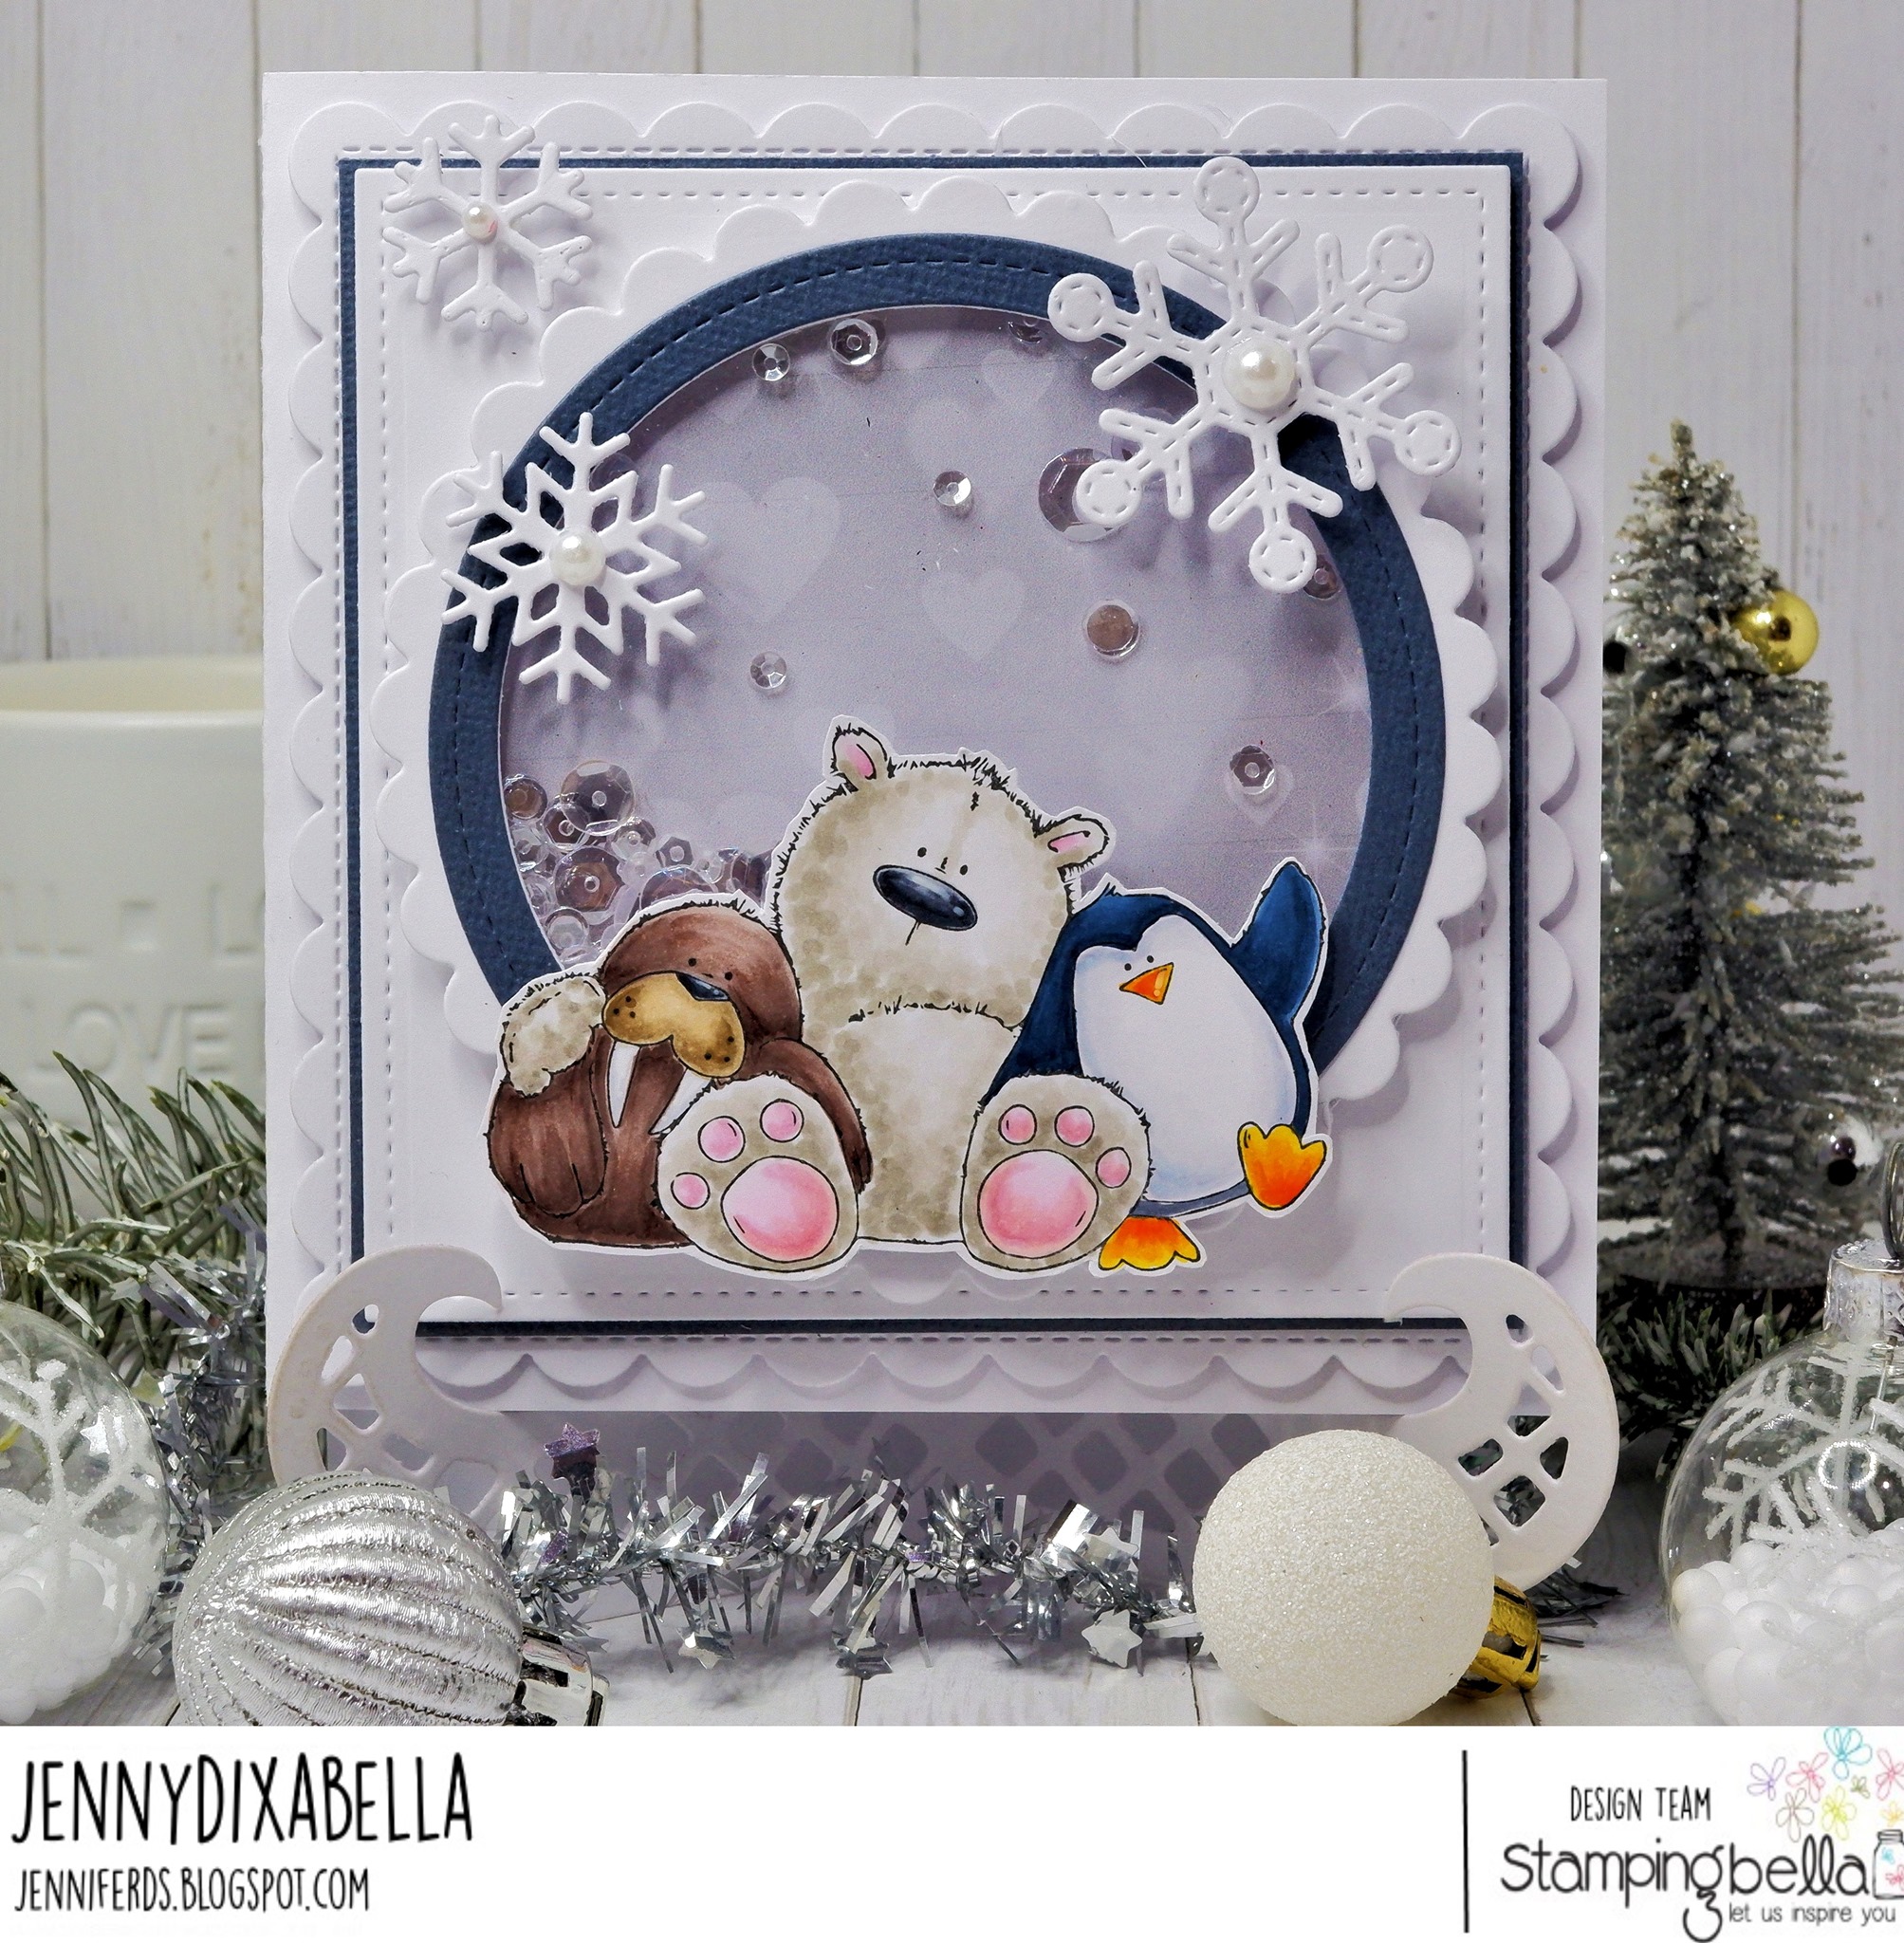 www.stampingbella.com : rubber stamp used- THE WALRUS the POLAR BEAR and the Penguin, card by Jenny Dix